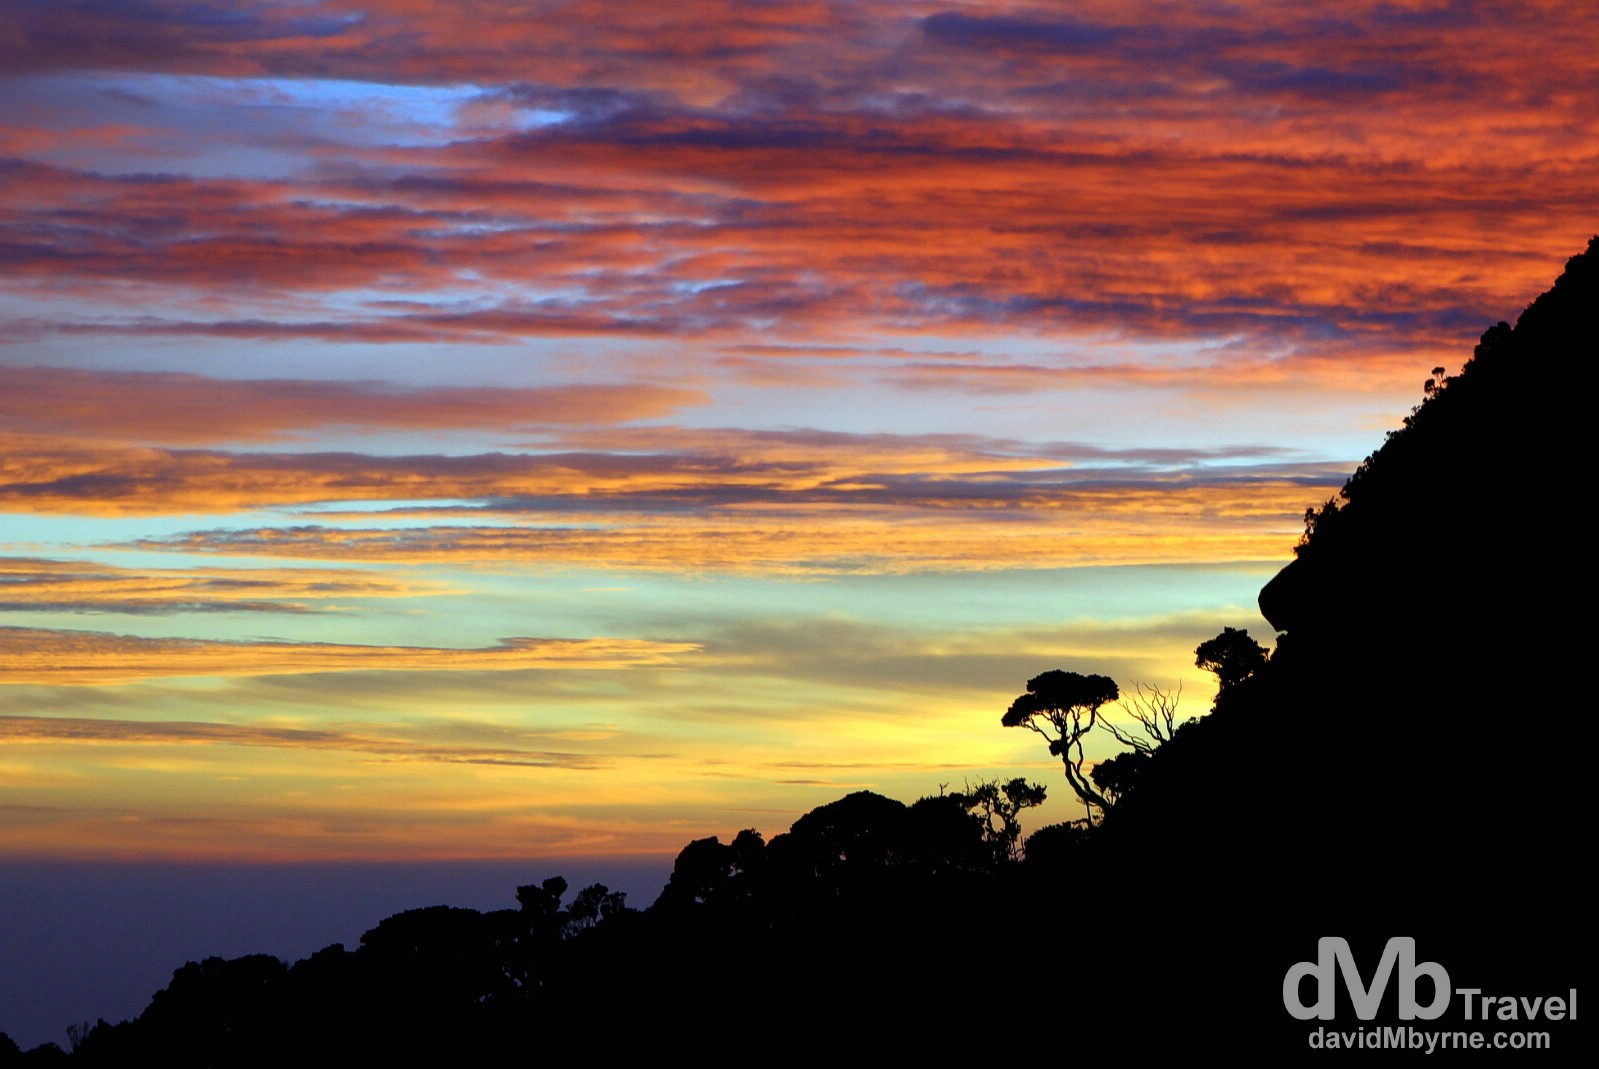 Sunset from the village of Laban Rata high on the slopes of Mount Kinabalu, Sabah, Malaysian Borneo. June 22nd 2012.